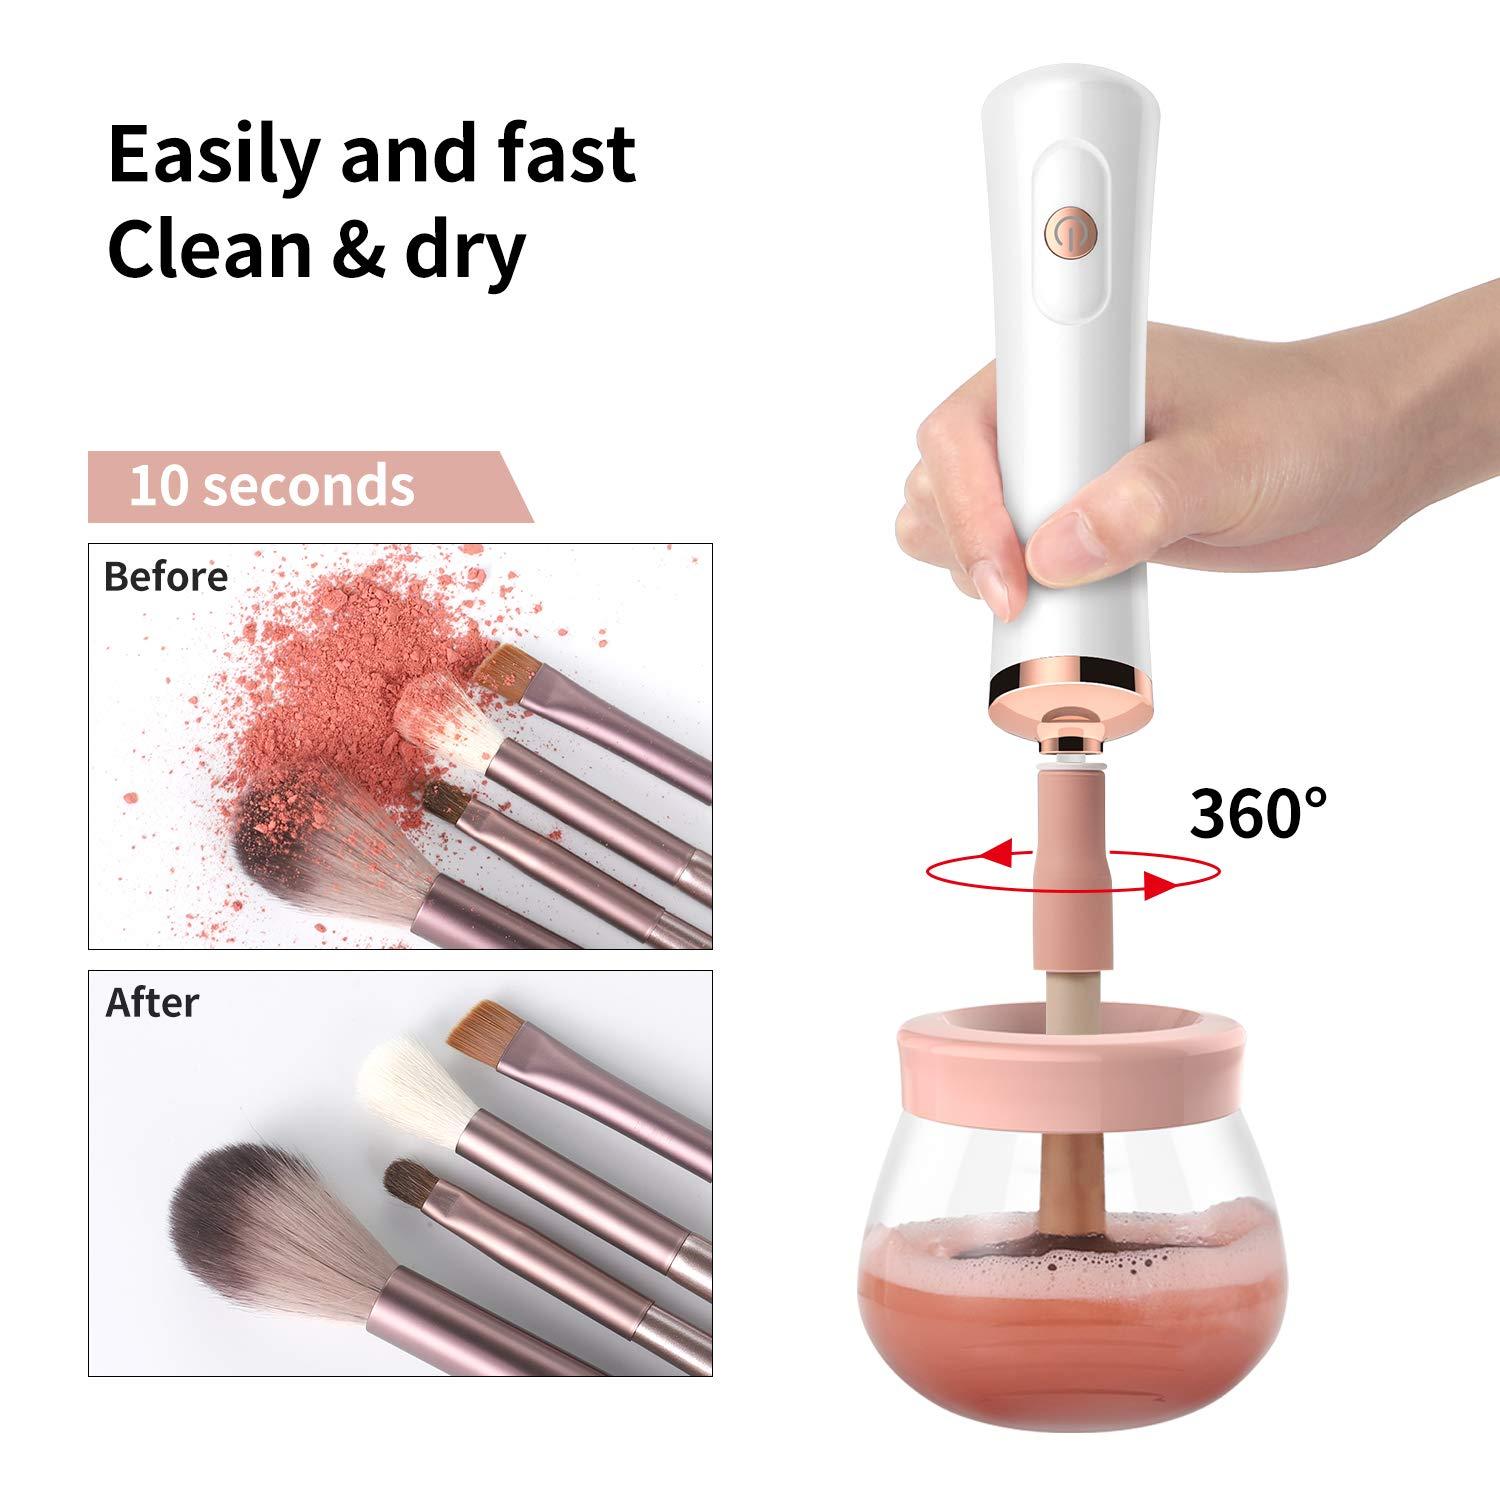 Fast Makeup Brush Cleaner & Dryer Machine 8 Collar Sizes Electric